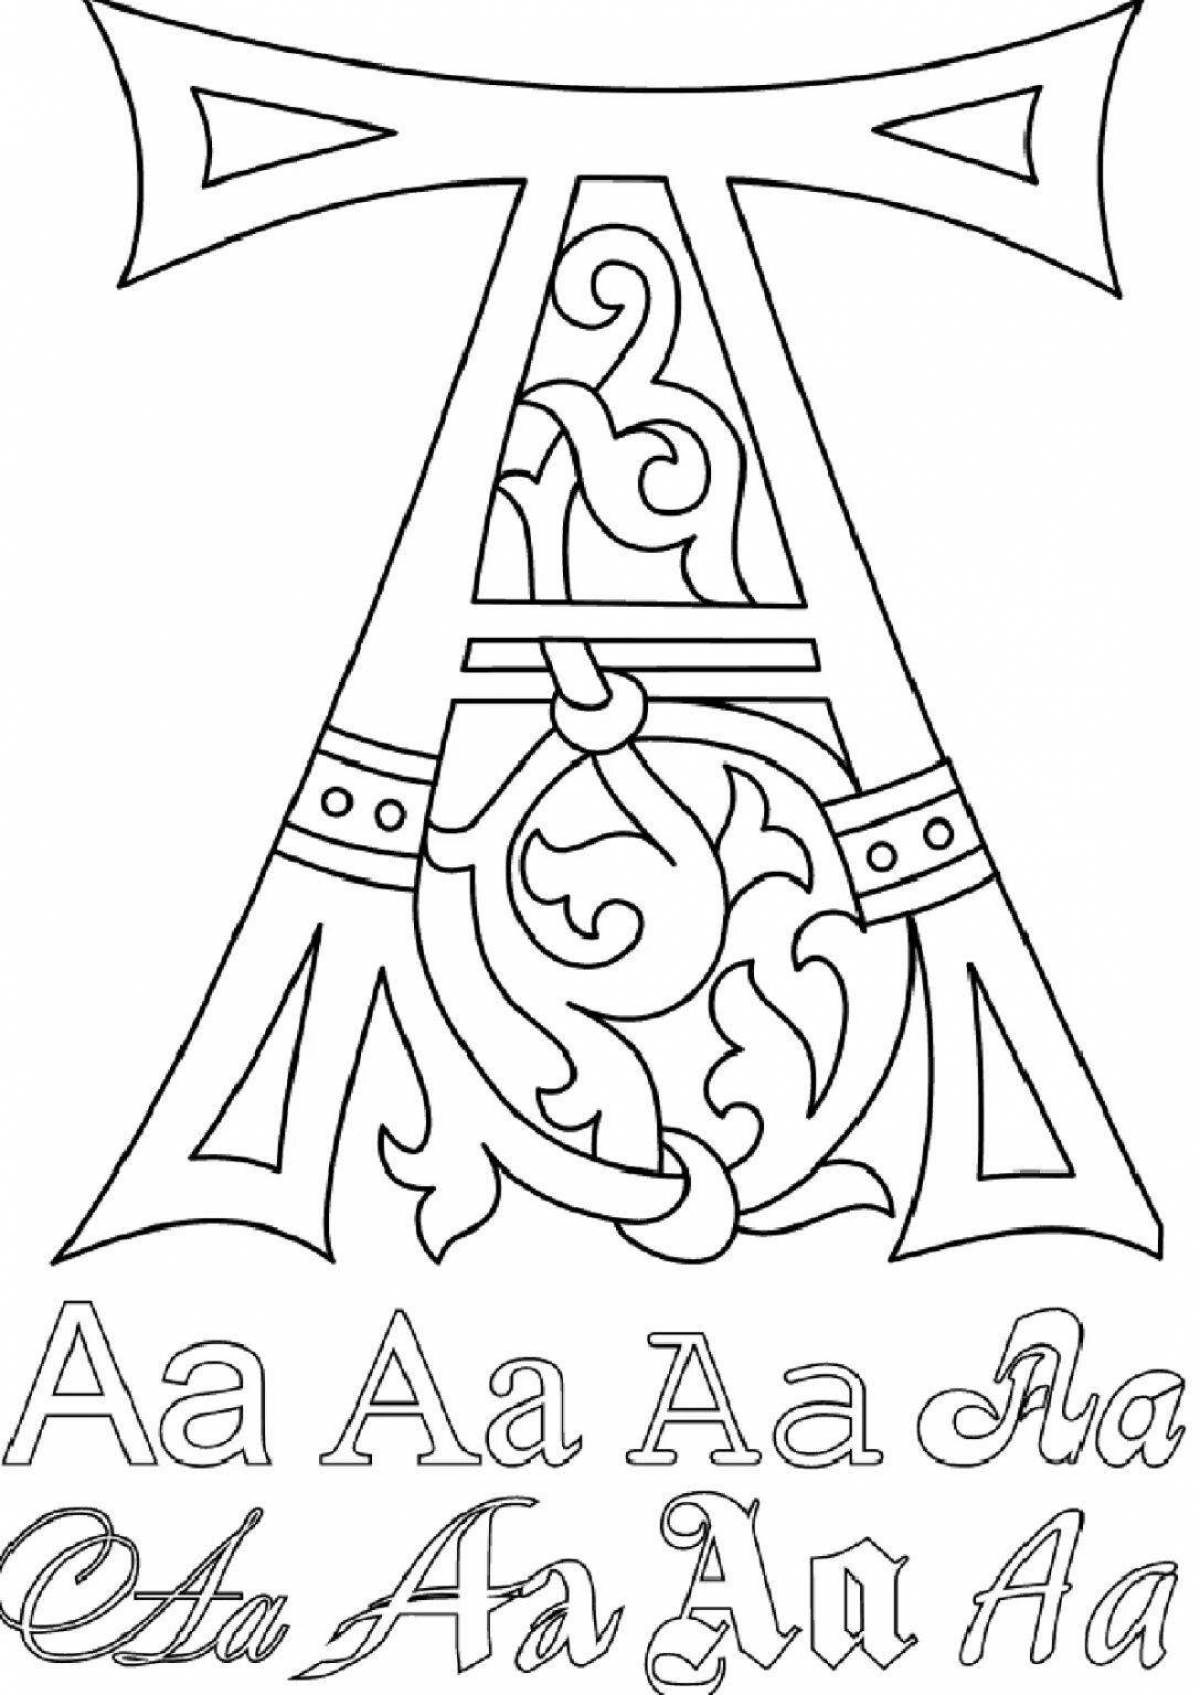 Coloring book sparkling initial letter slavic